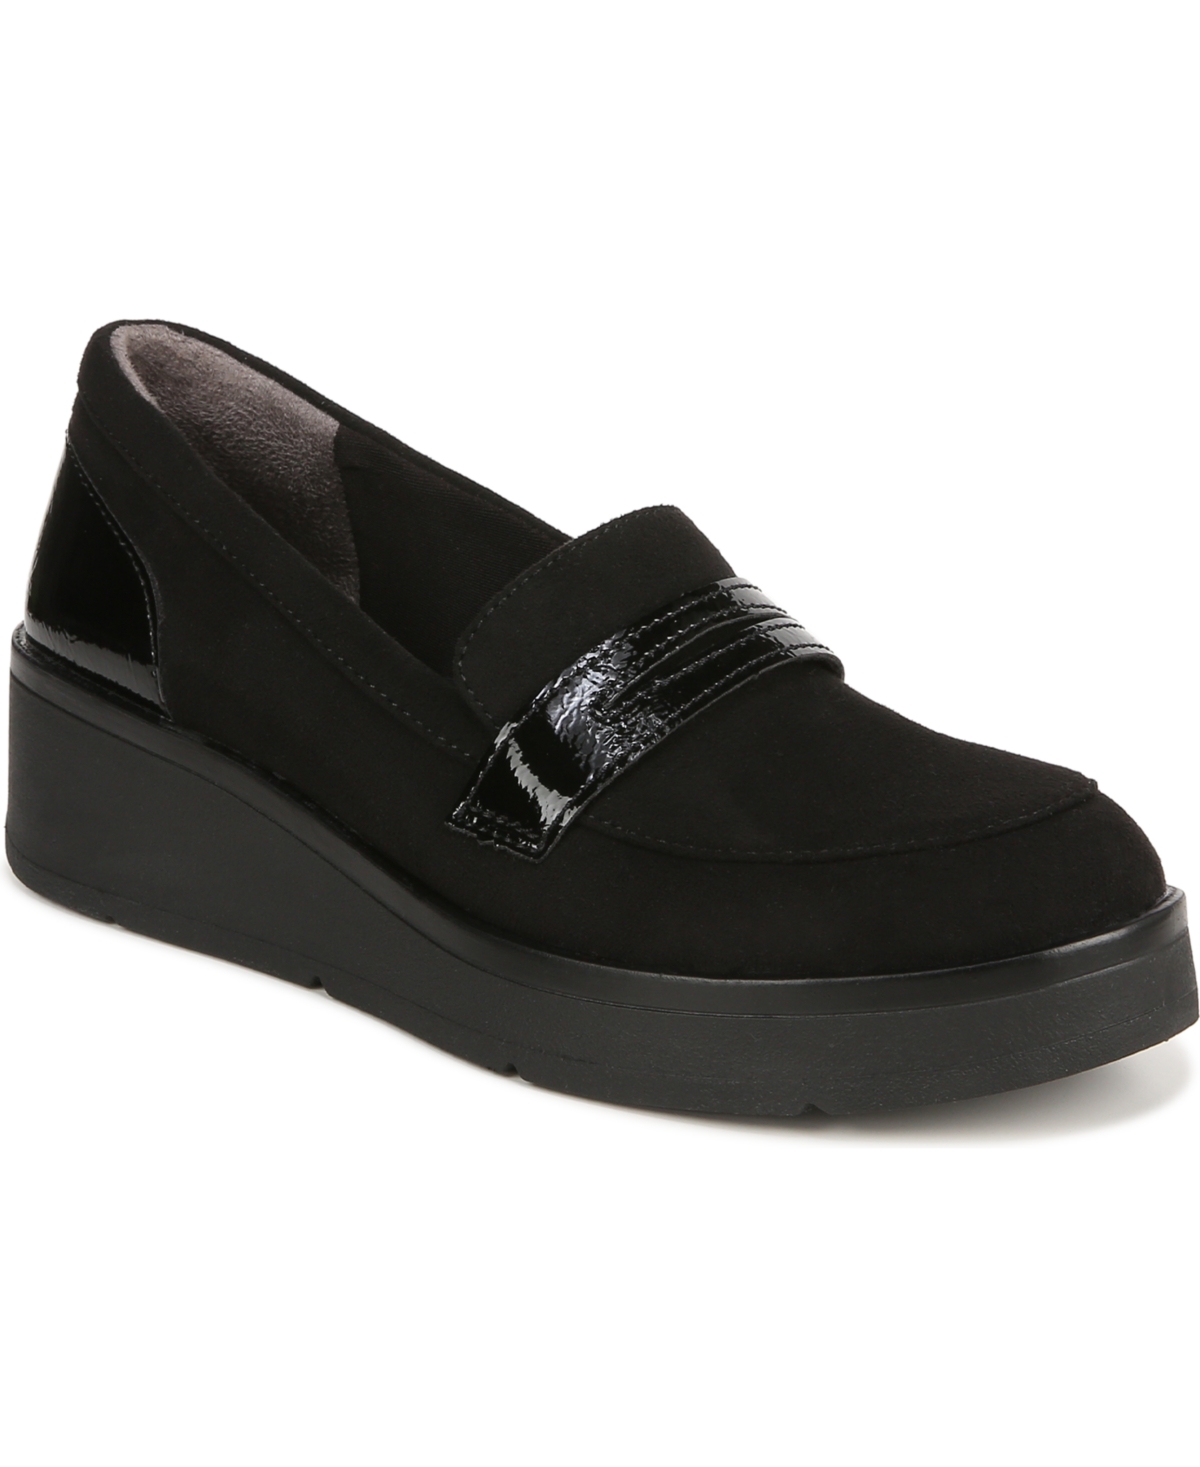 Fast Track Washable Loafers - Black Microfiber/Faux Patent